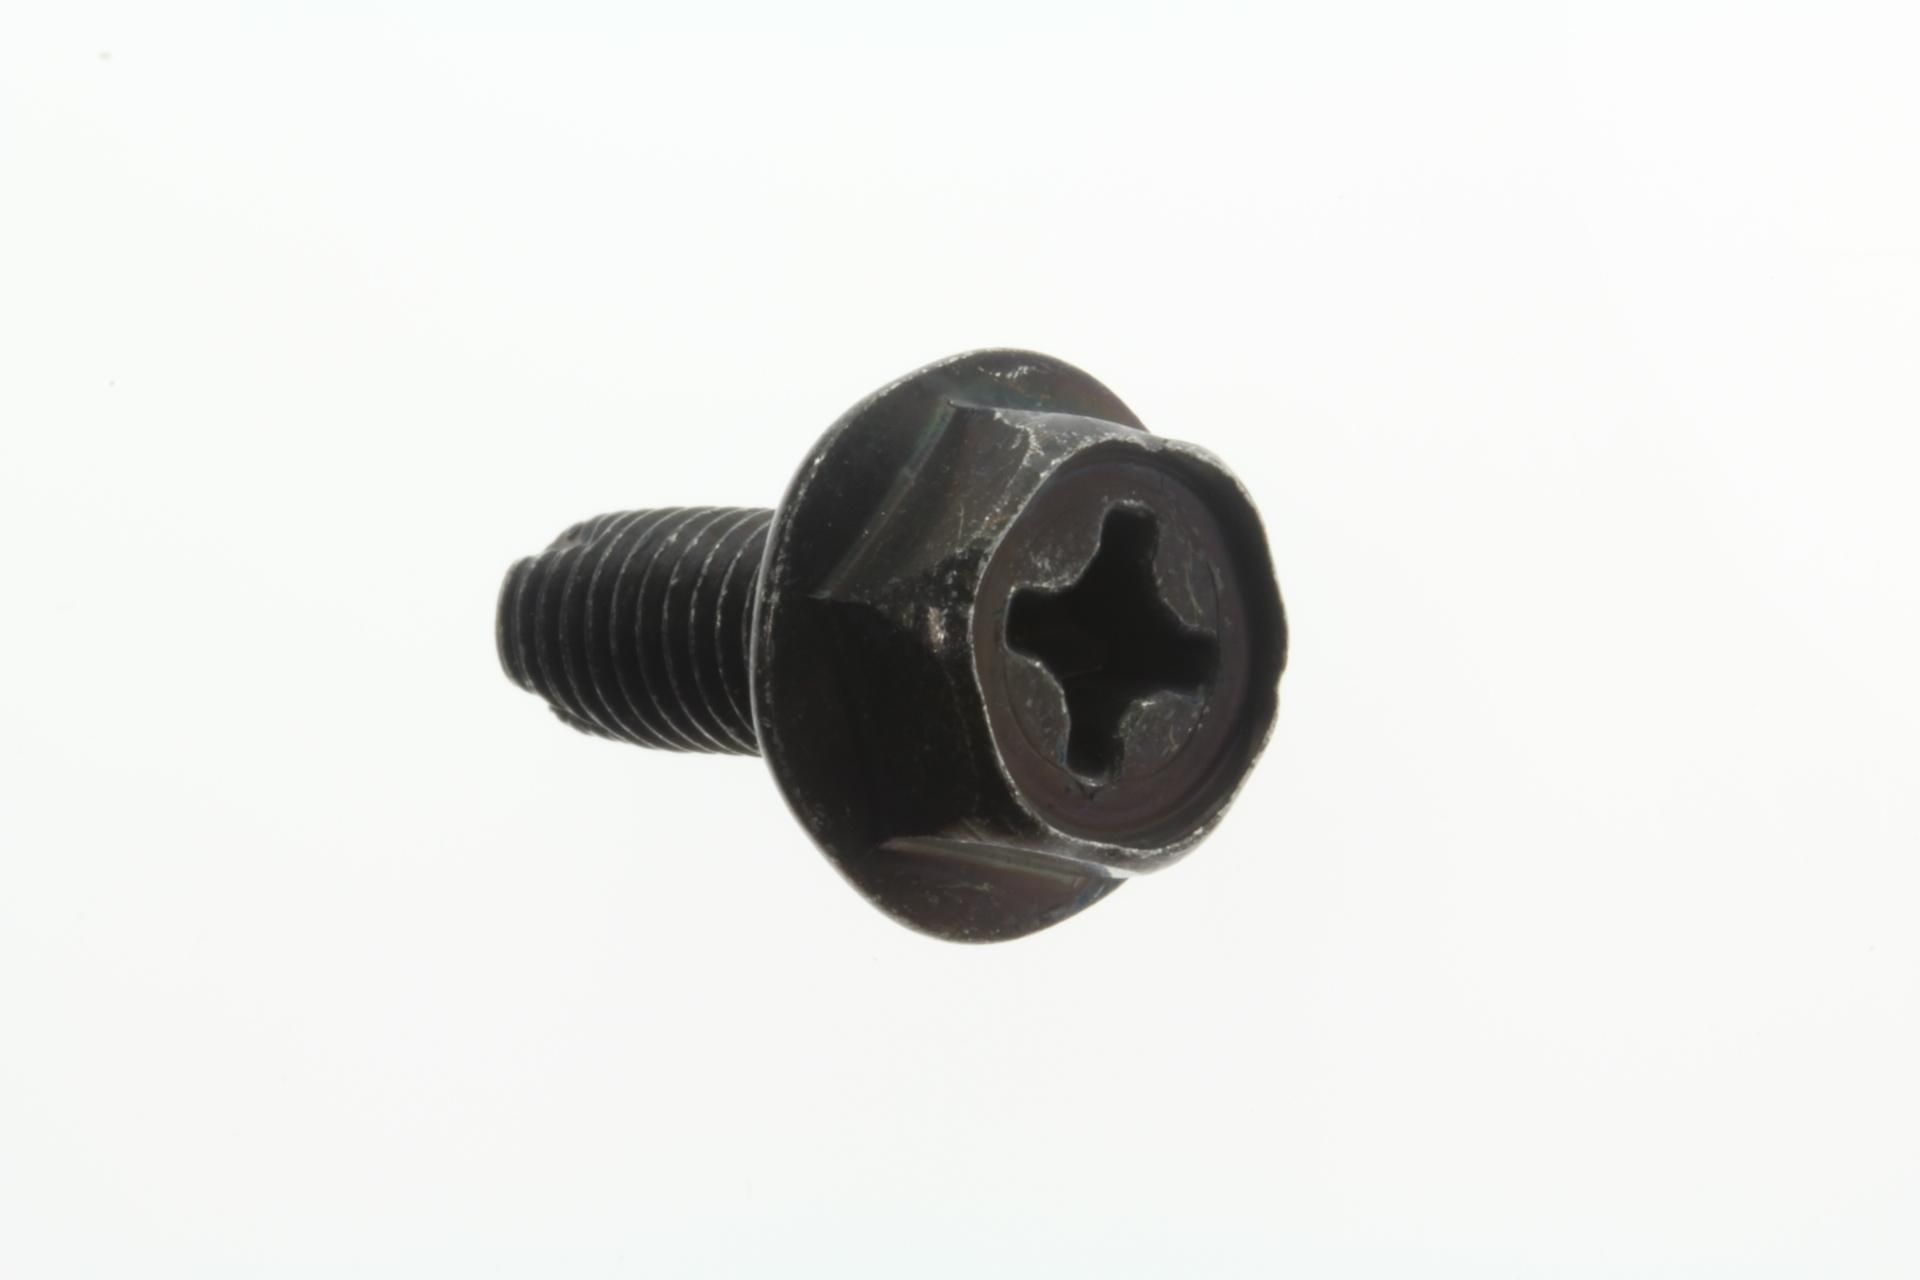 02162-06163 Superseded by 02162-0616B - SCREW